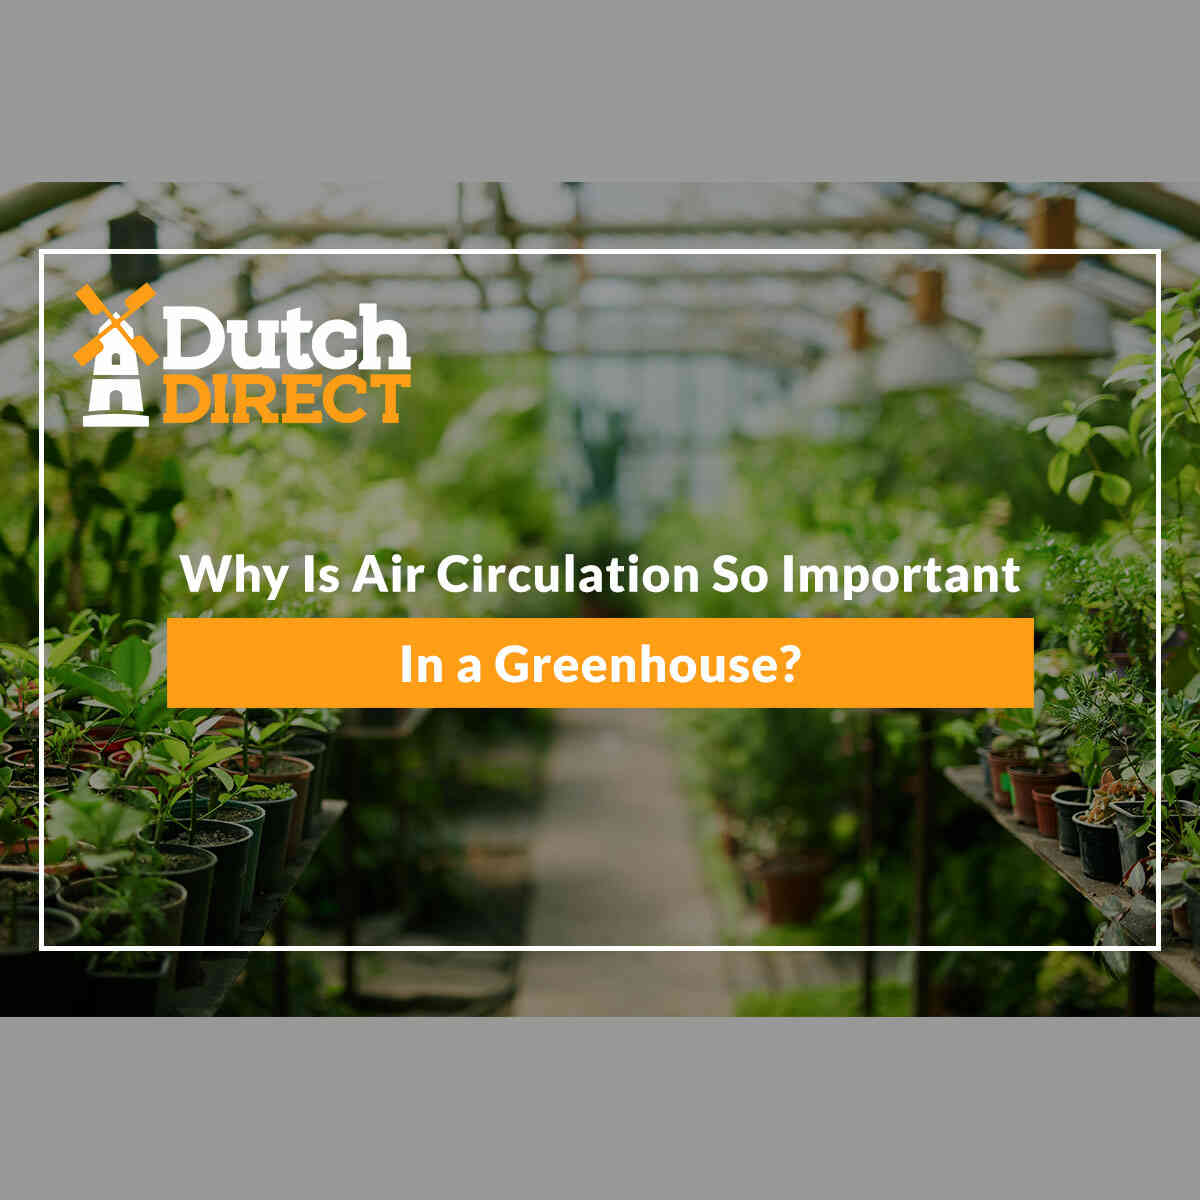 Why Is Air Circulation So Important In a Greenhouse?